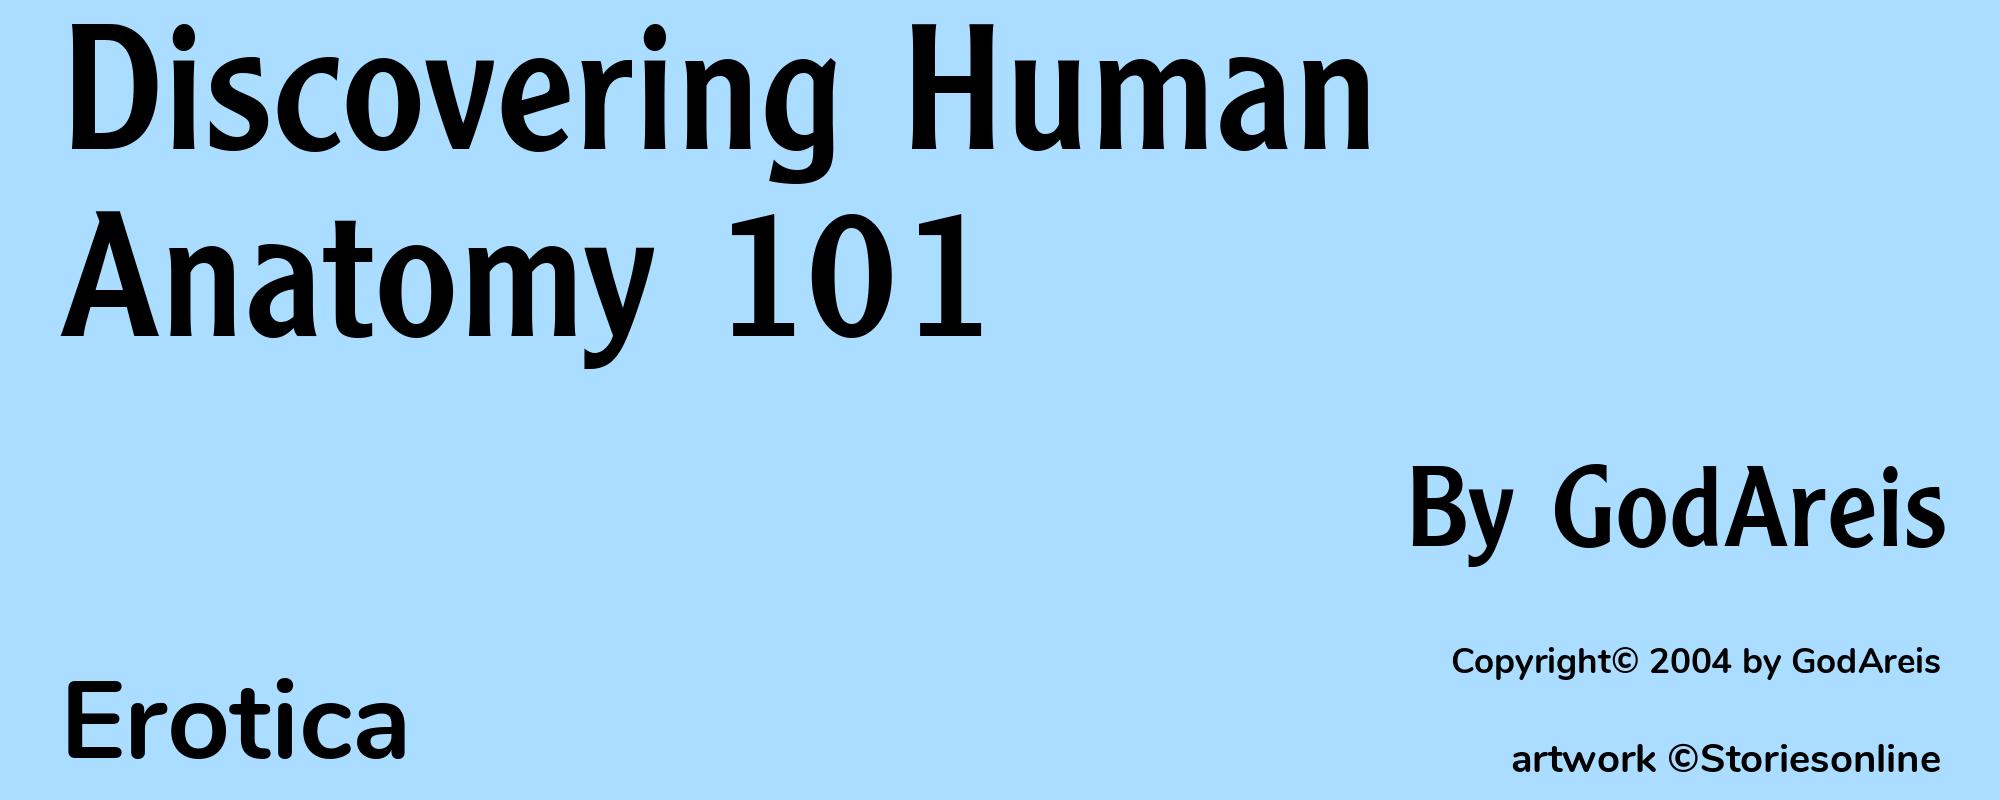 Discovering Human Anatomy 101 - Cover